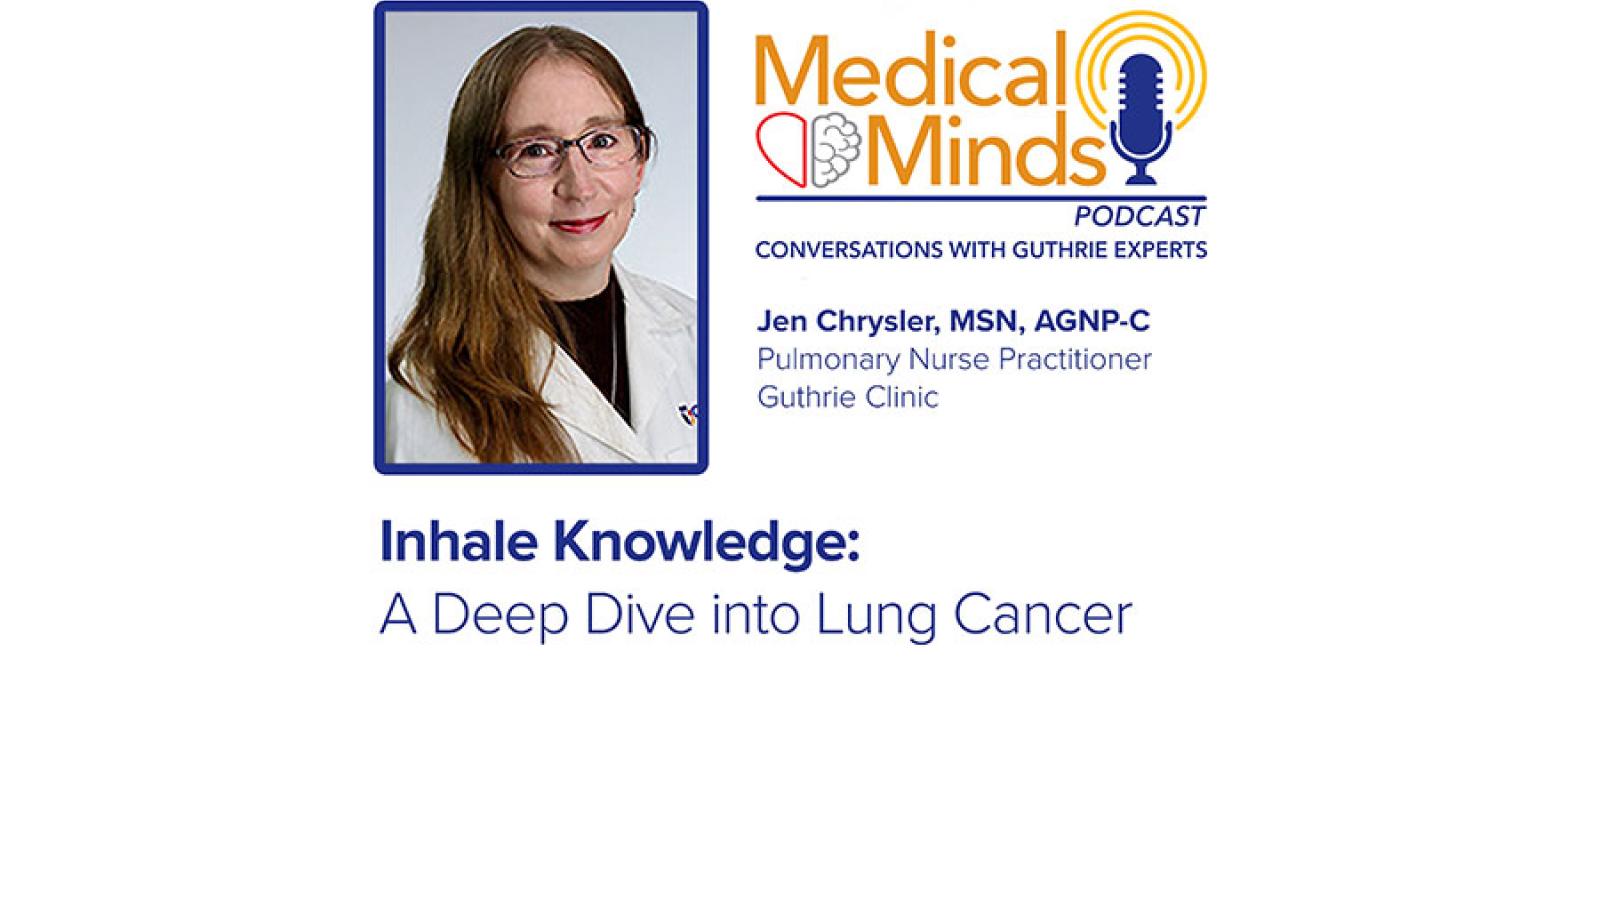 Inhale Knowledge: A Deep Dive into Lung Cancer